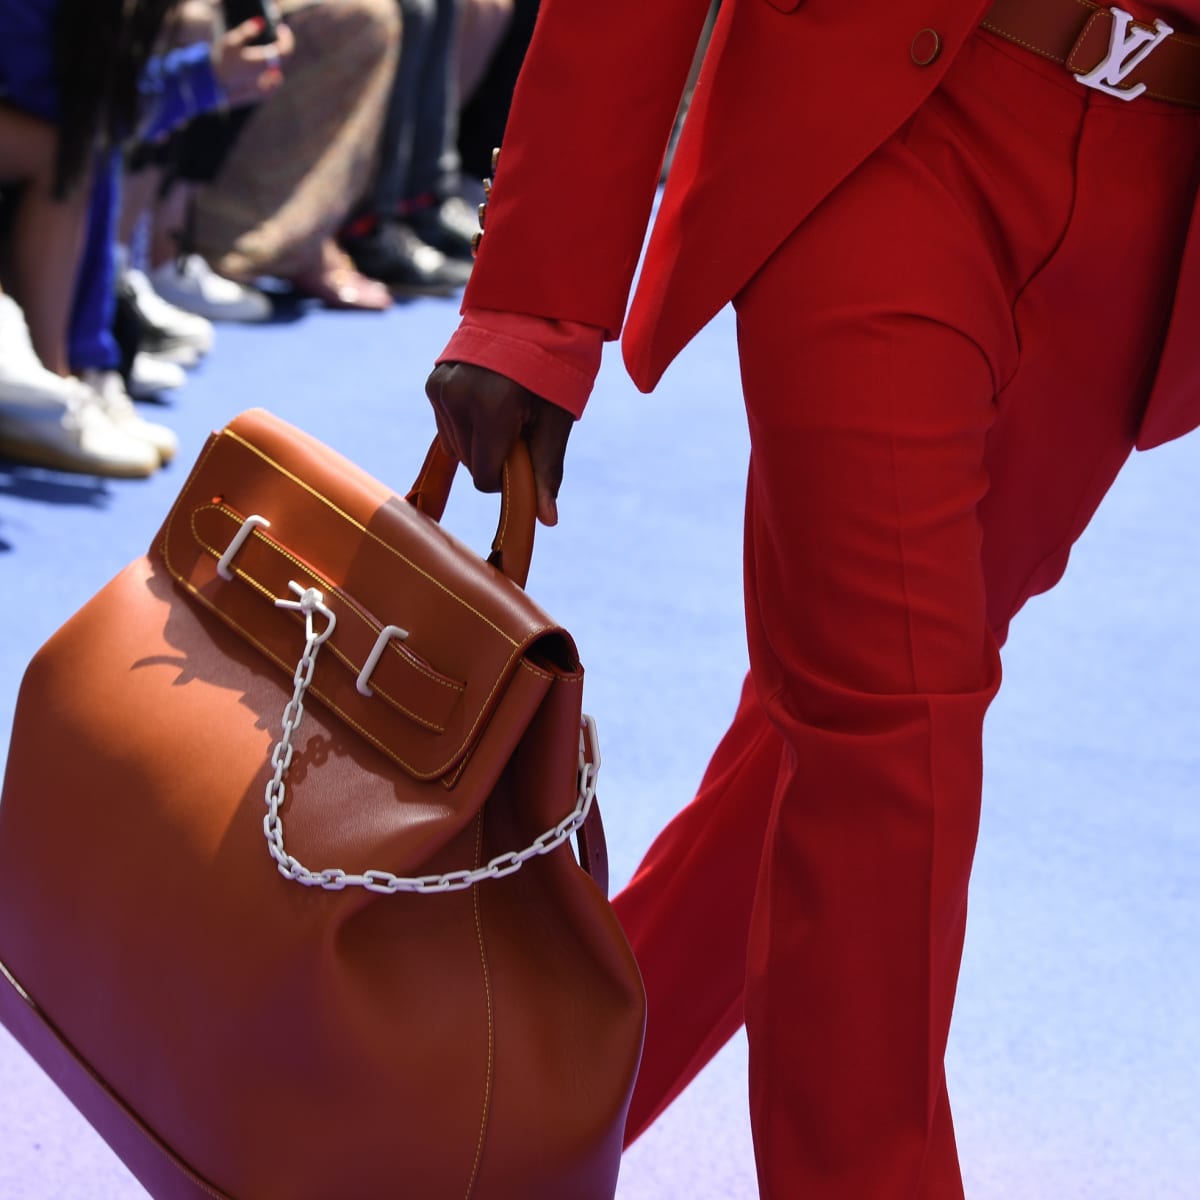 Luxury giant LVMH posts record annual sales and profits